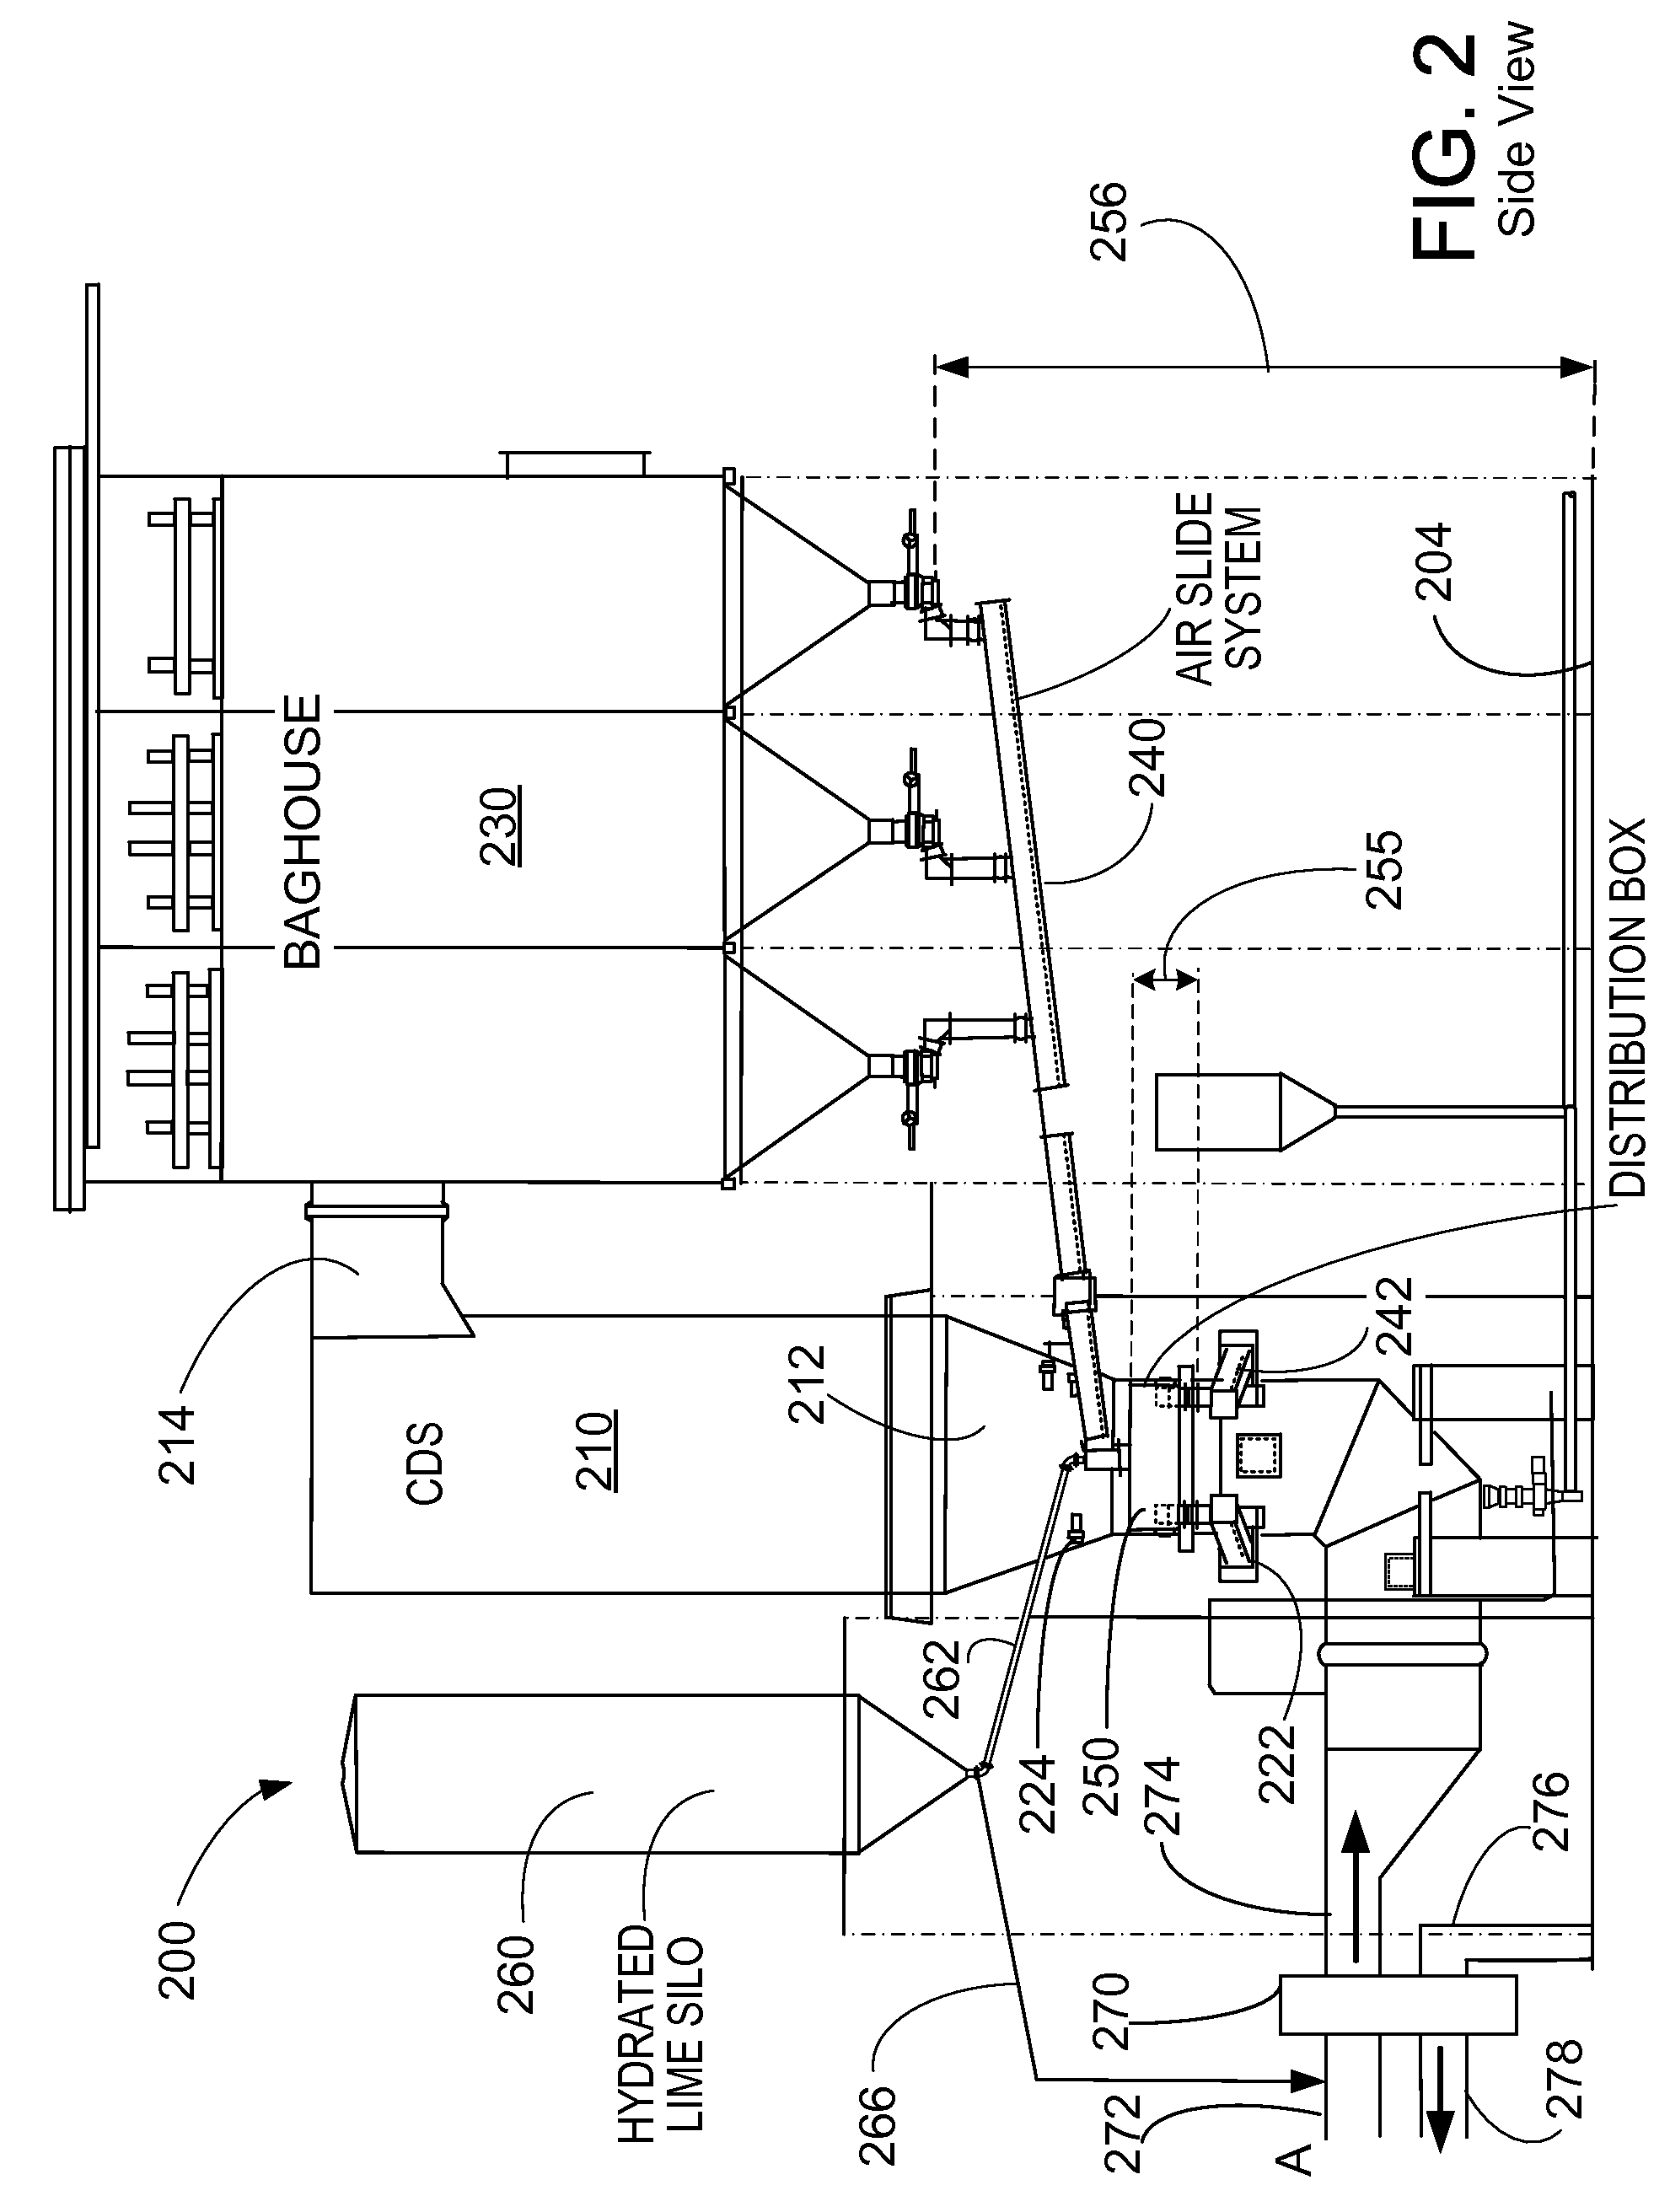 Integrated sorbent injection and flue gas desulfurization system